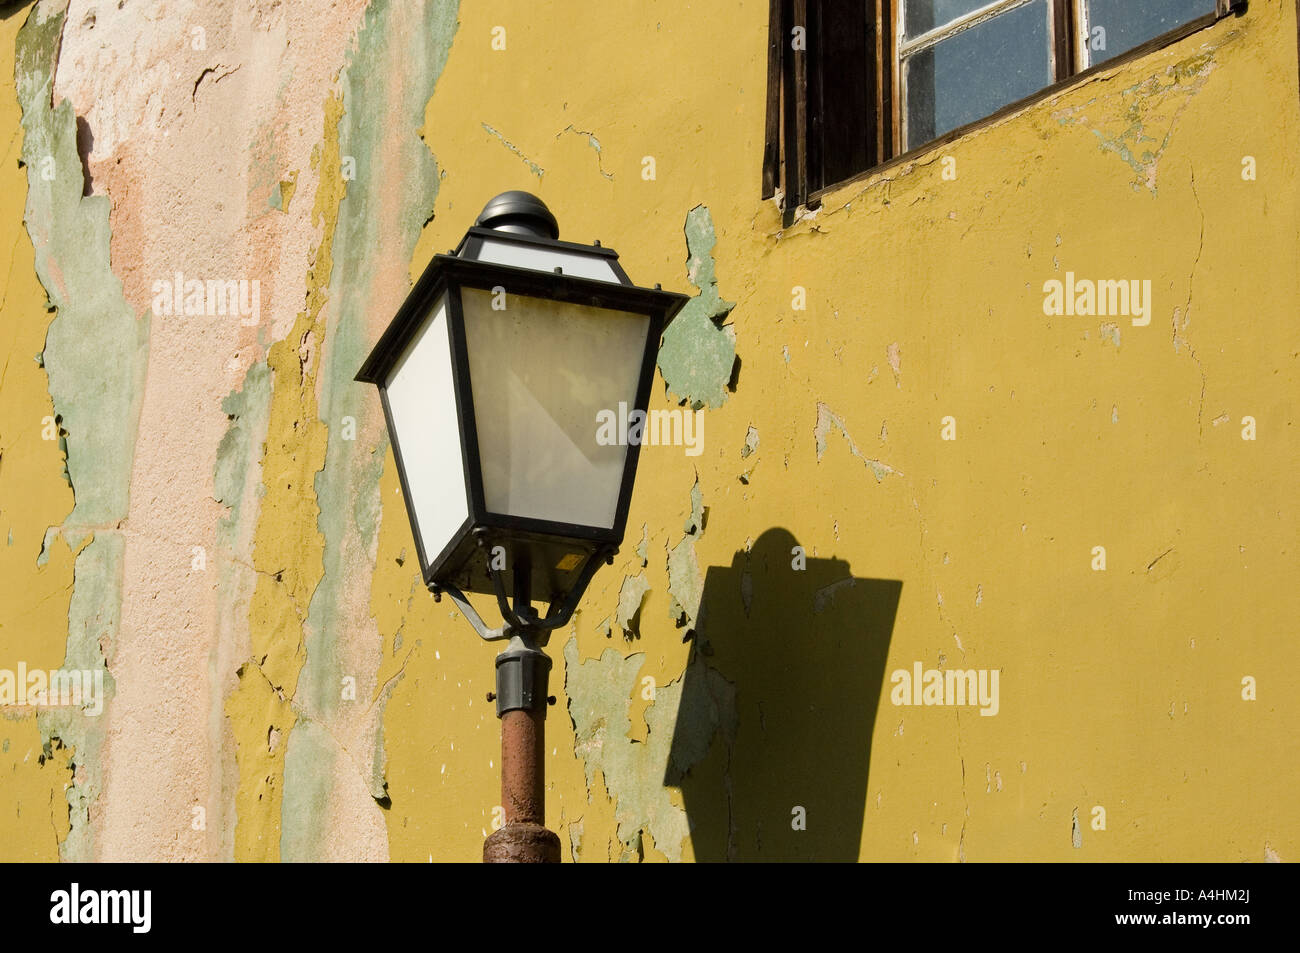 A street lamp with peeling wall paint background Old Plovdiv Bulgaria East Europe Stock Photo